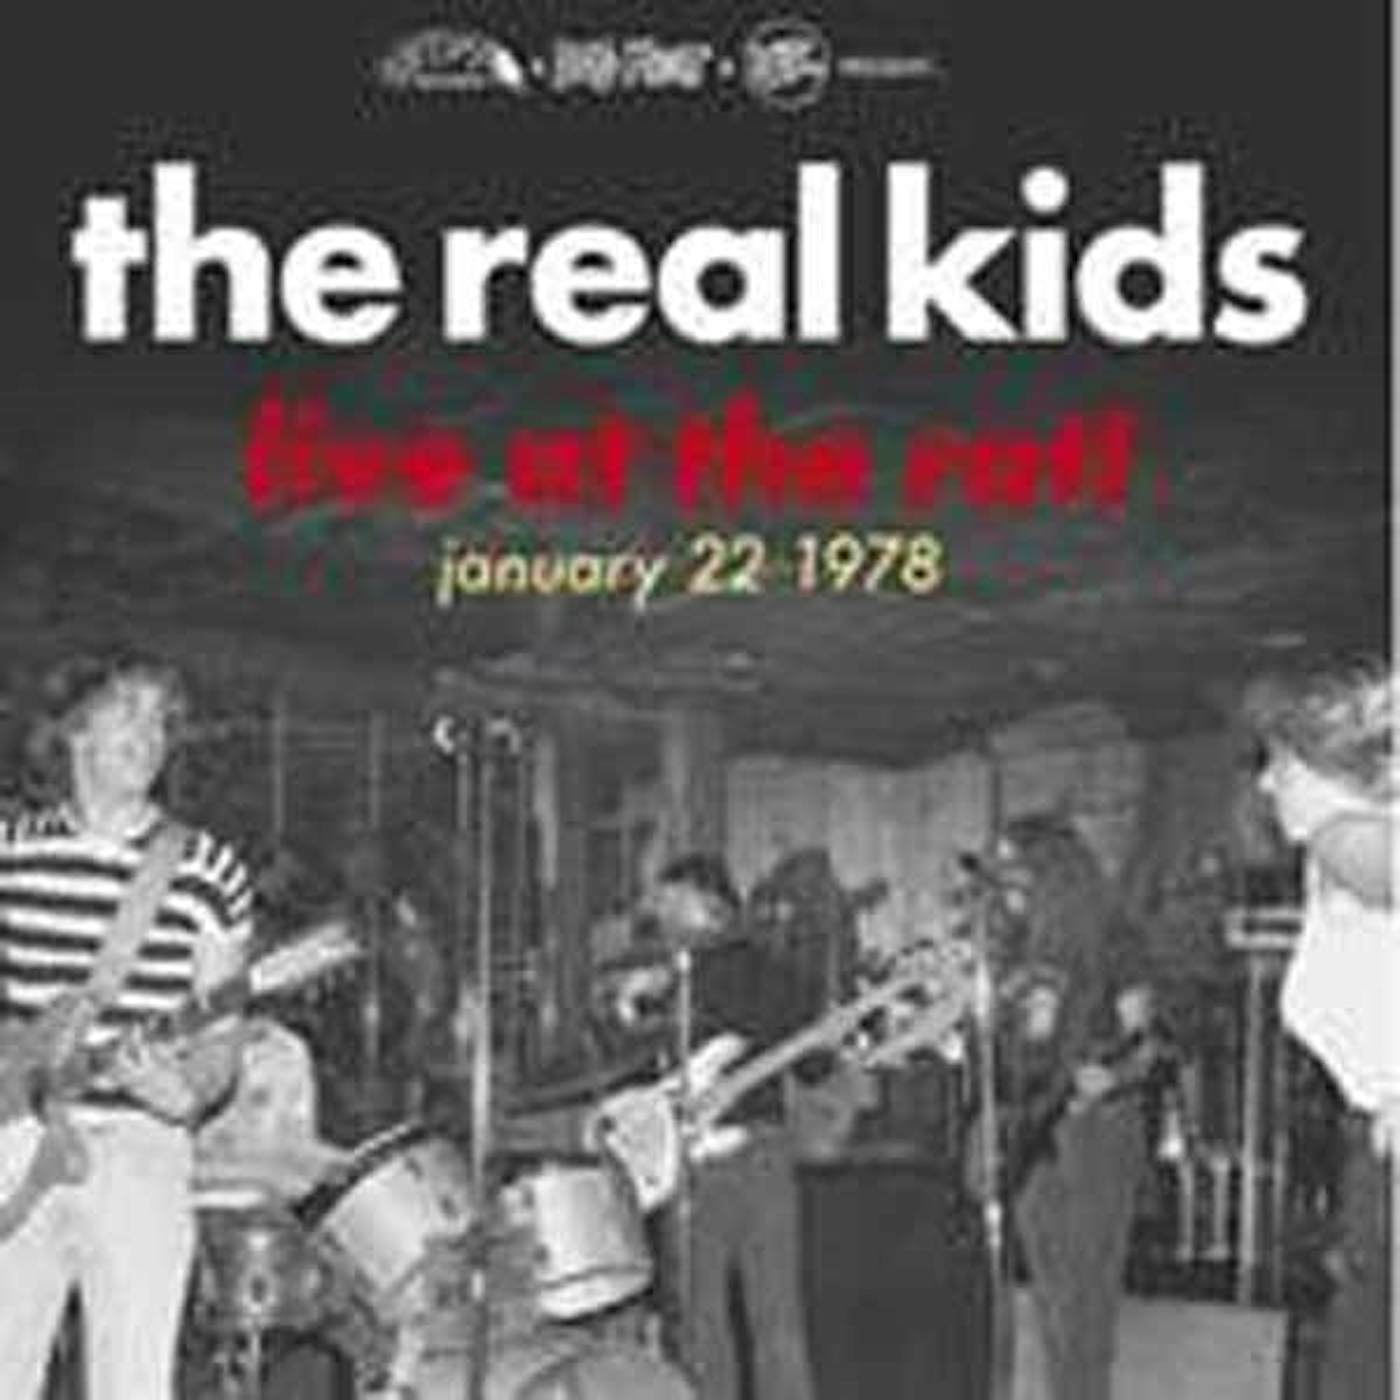 The Real Kids LP - Live At The Rat! January 22 1978 (Vinyl)